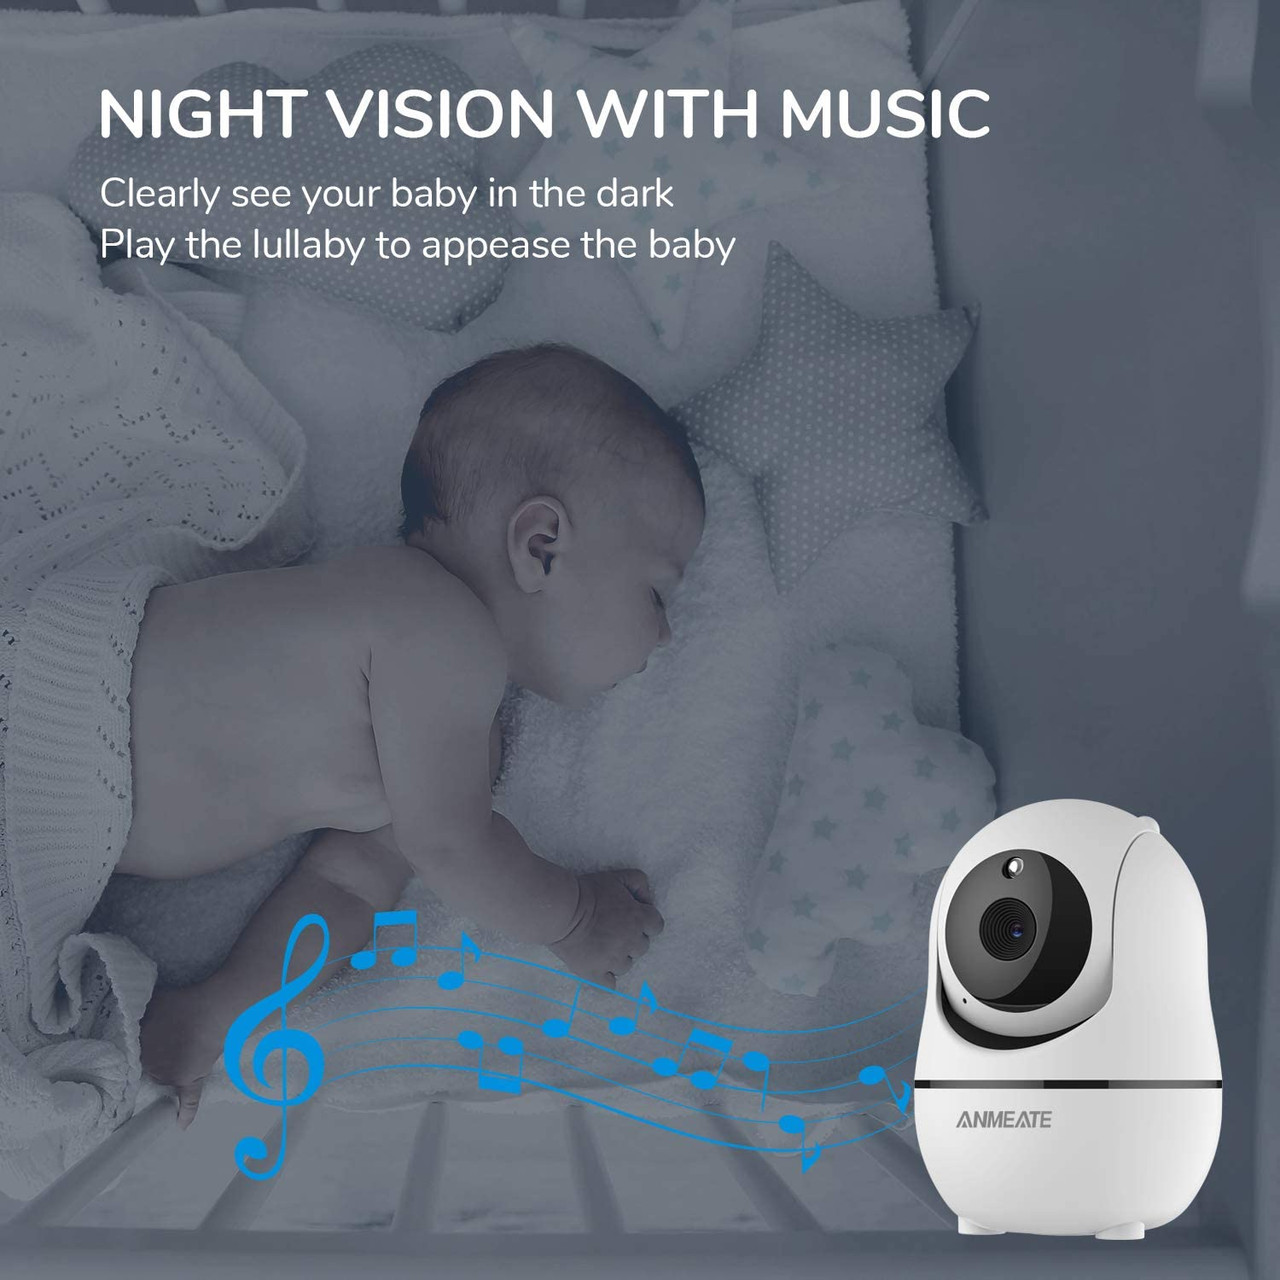 Baby Monitor,5 Large Split-Screen Video Baby Monitor with 2 Cameras and  Audio, Remote Pan/Tilt/Zoom, Two-Way Talk, Room Temperature Monitor, Auto